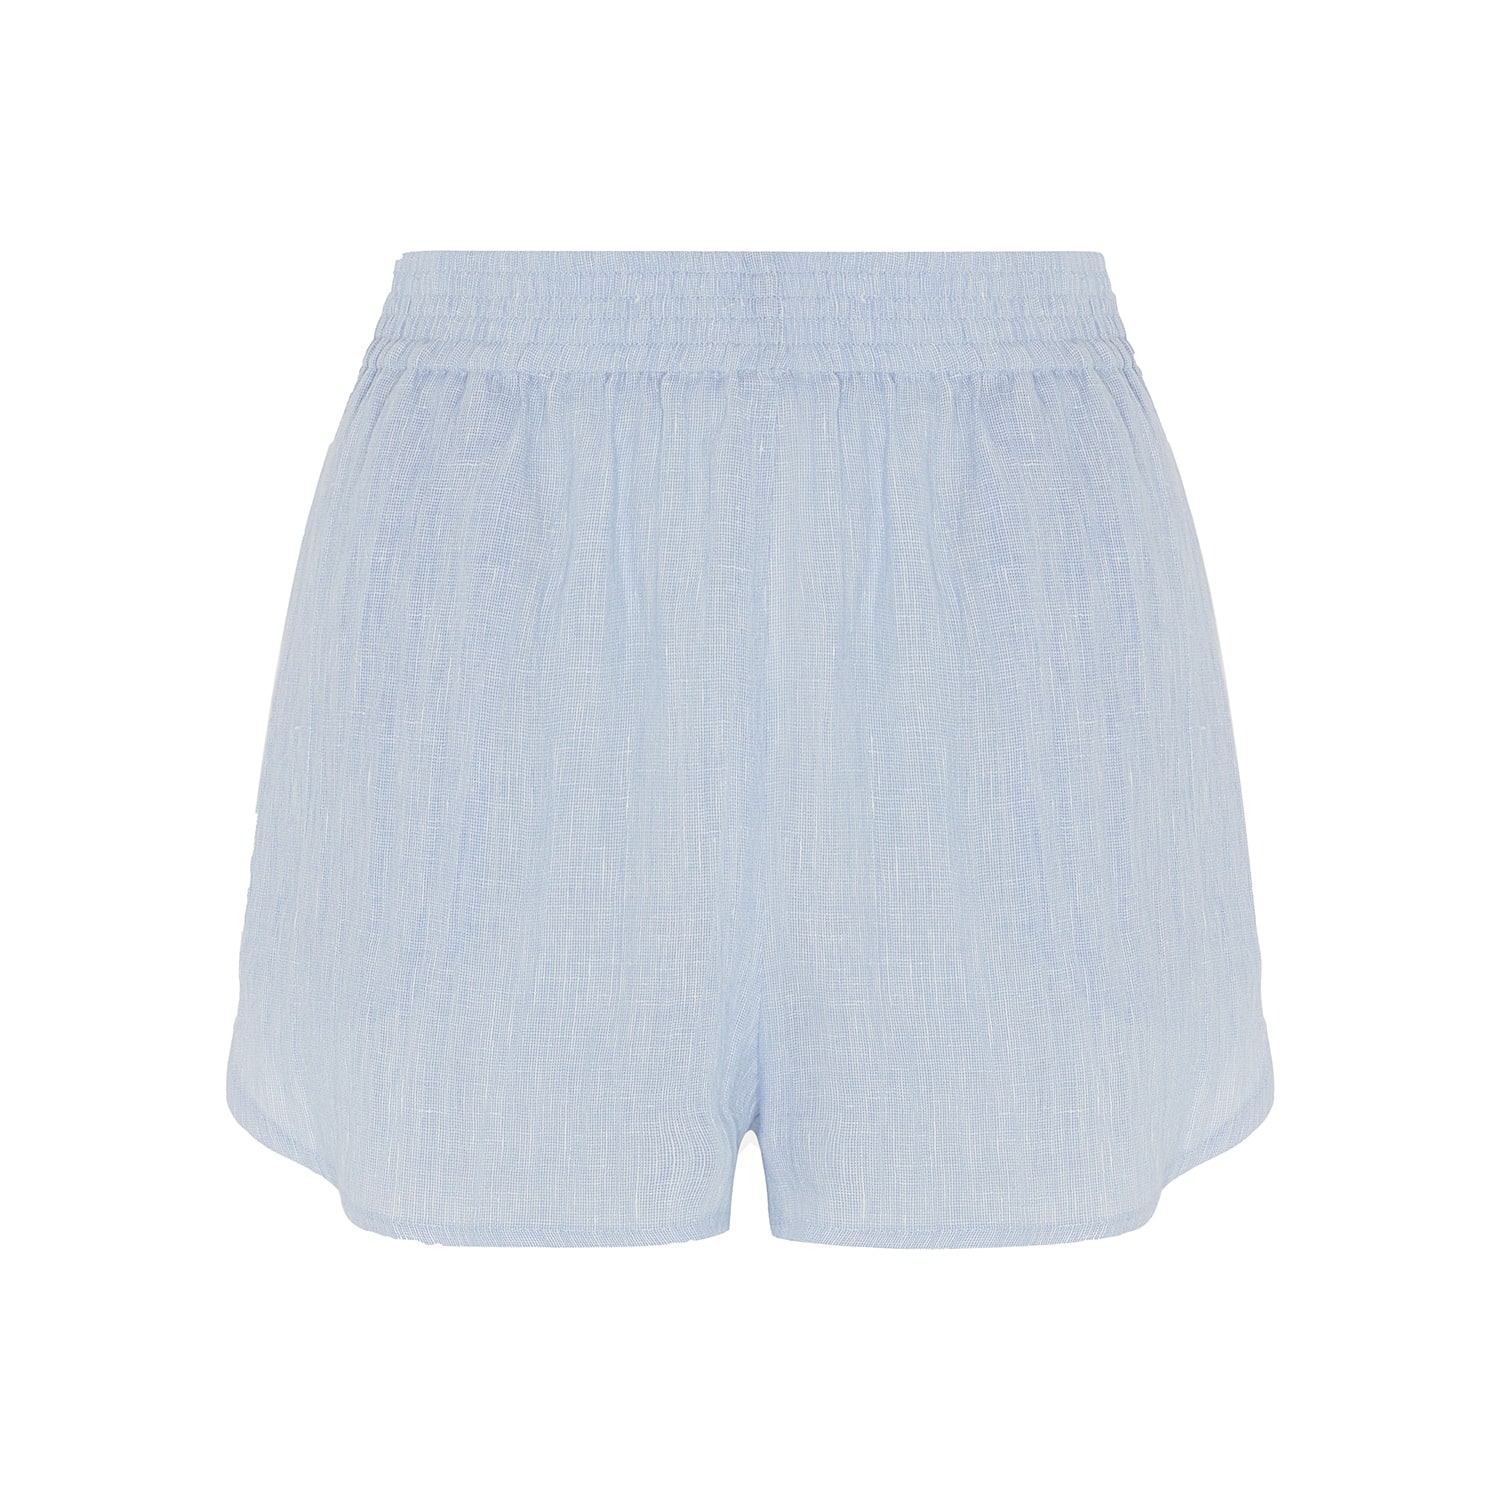 Darcy Linen Short - Chambray Blue Large The Summer Edit